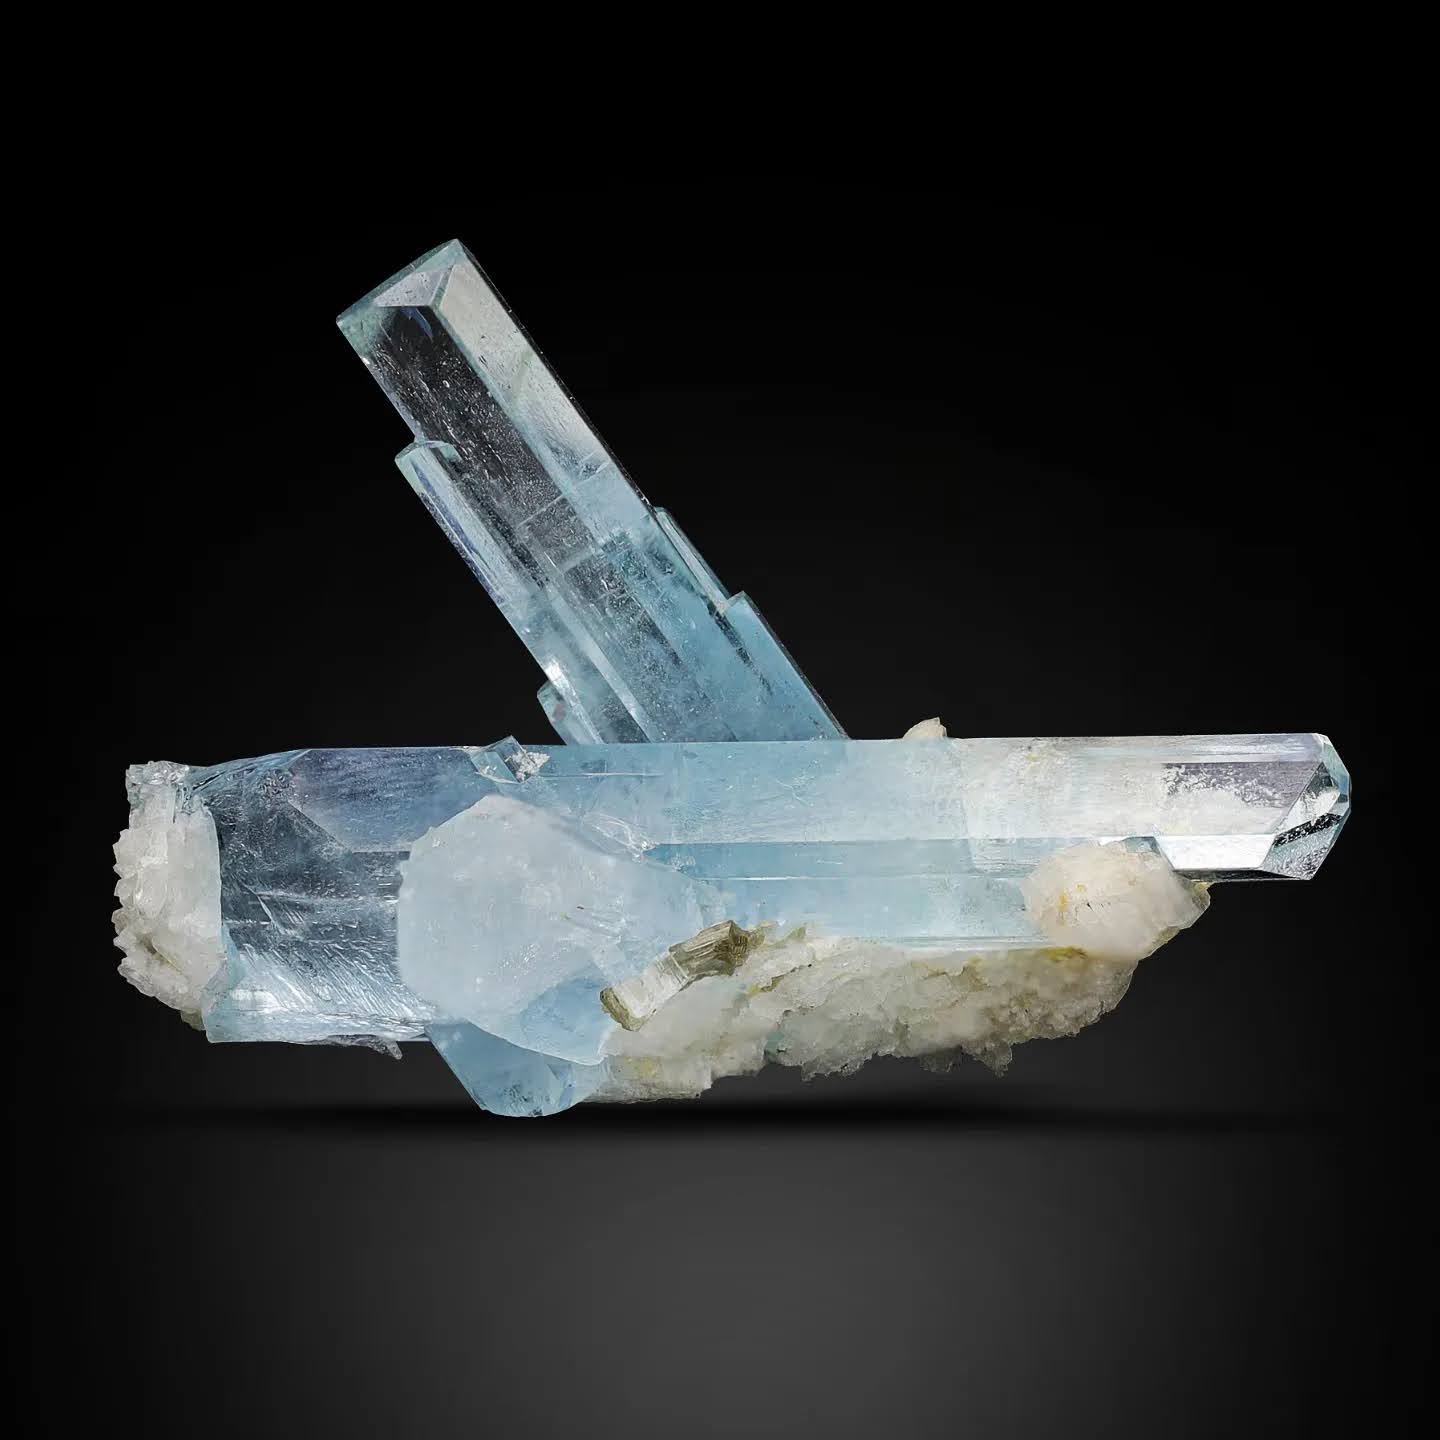 aggregate of gem blue Aquamarine crystals on Albite From Pakistan